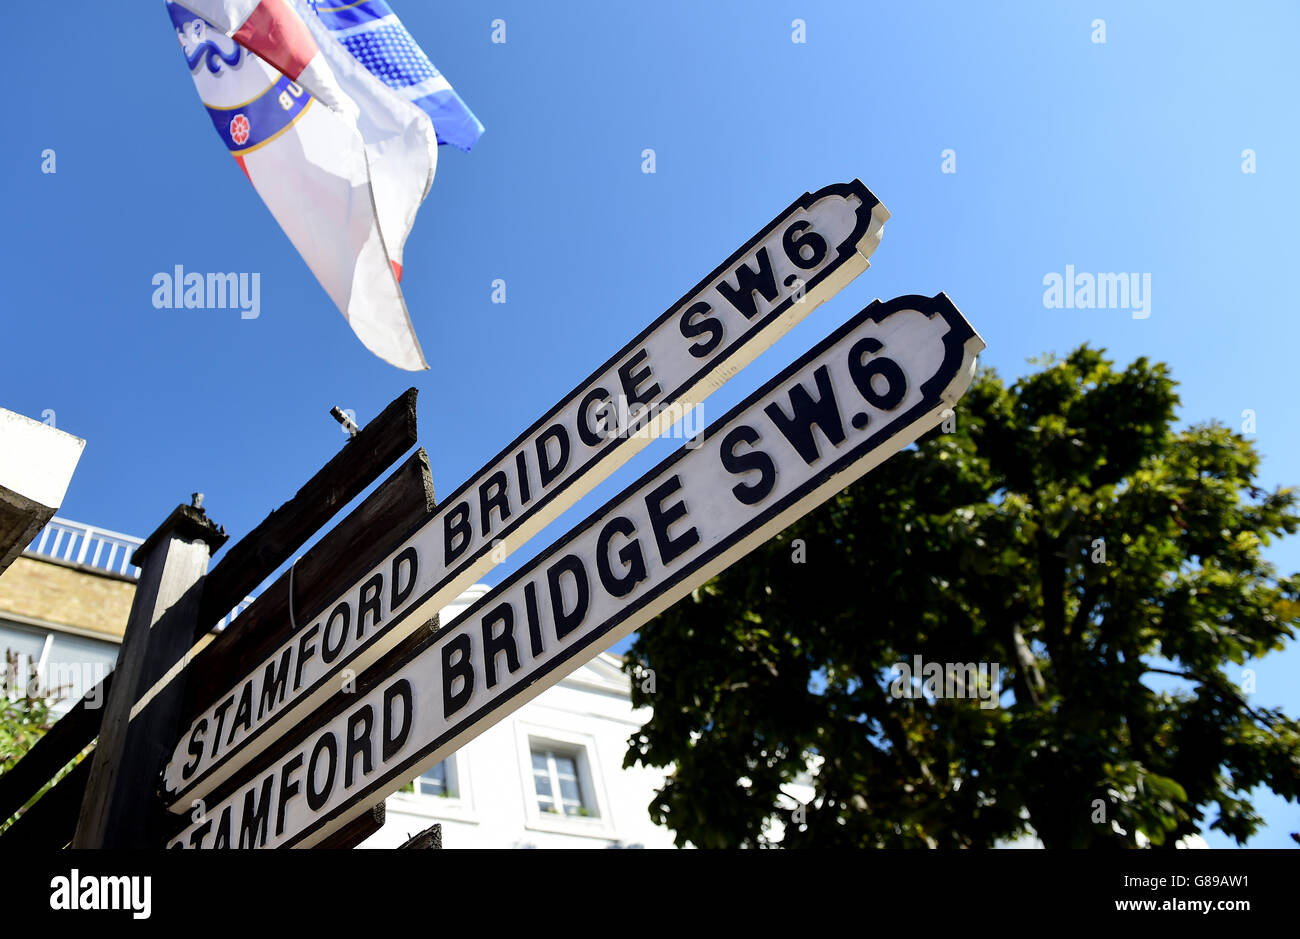 Detail view of Stamford Bridge street signs before the Barclays Premier League match at Stamford Bridge, London. Stock Photo